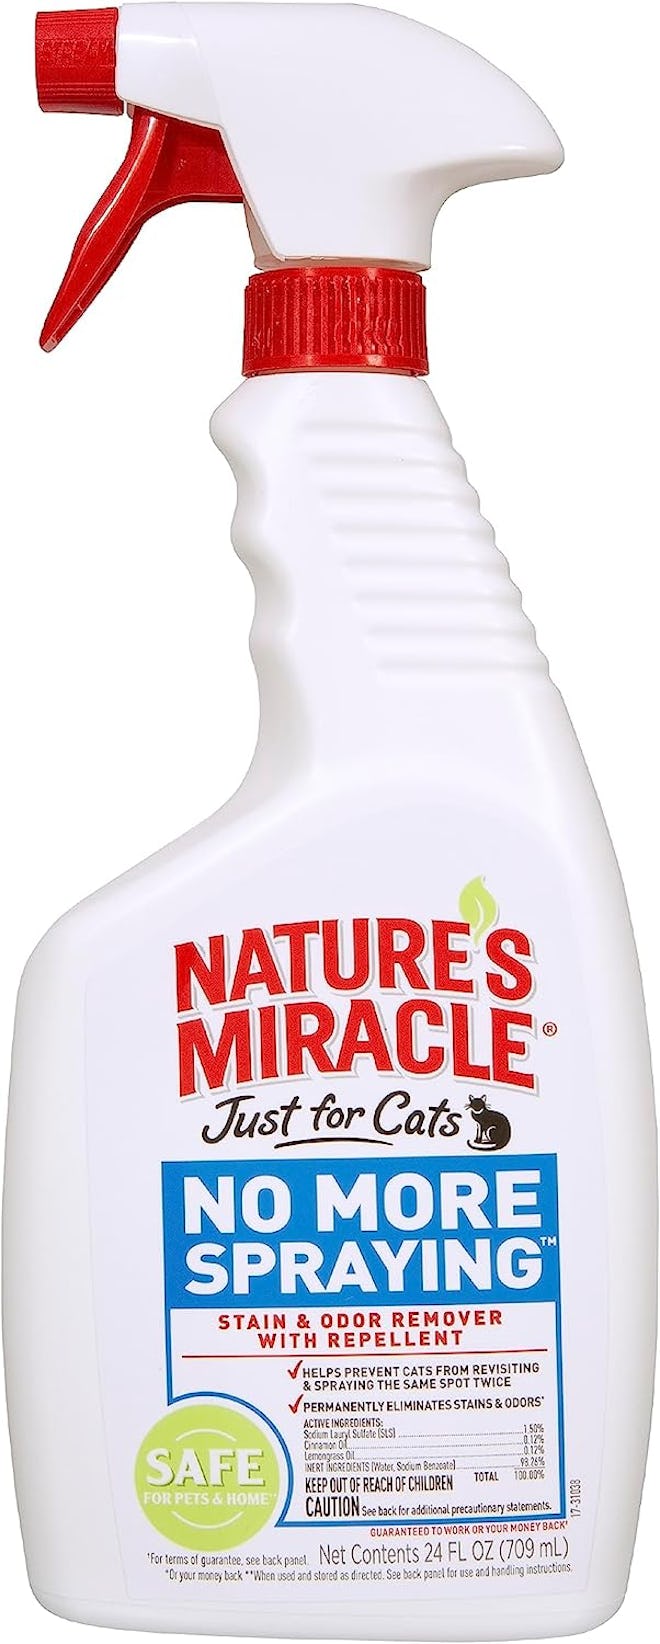 Nature’s Miracle No More Spraying Stain & Odor Remover & Repellent